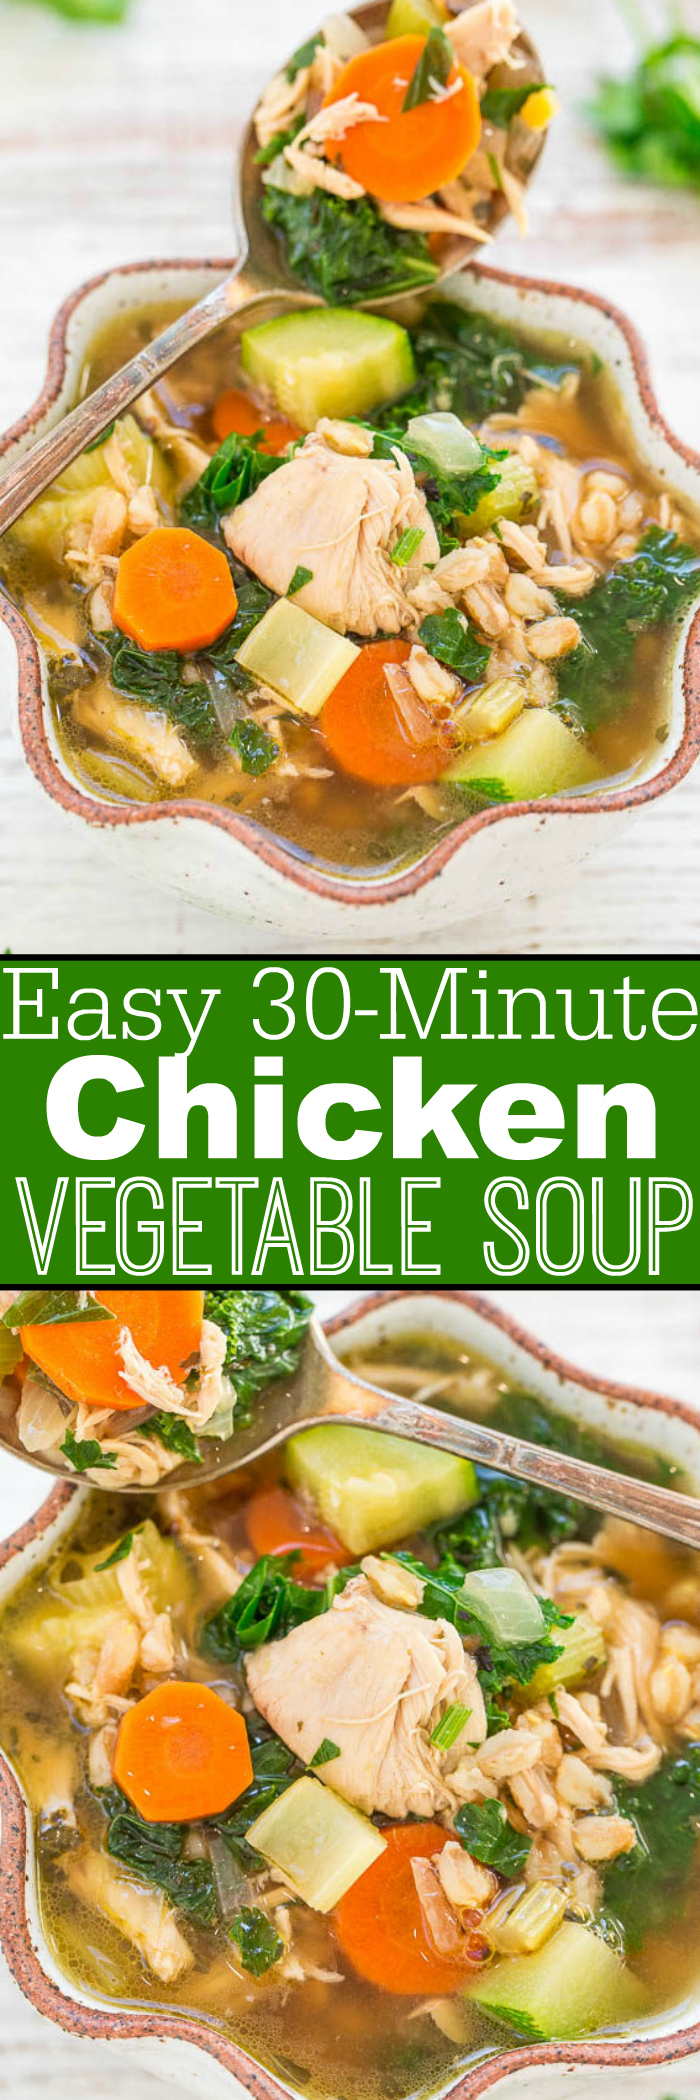 Easy 30-Minute Chicken Vegetable Soup - Averie Cooks